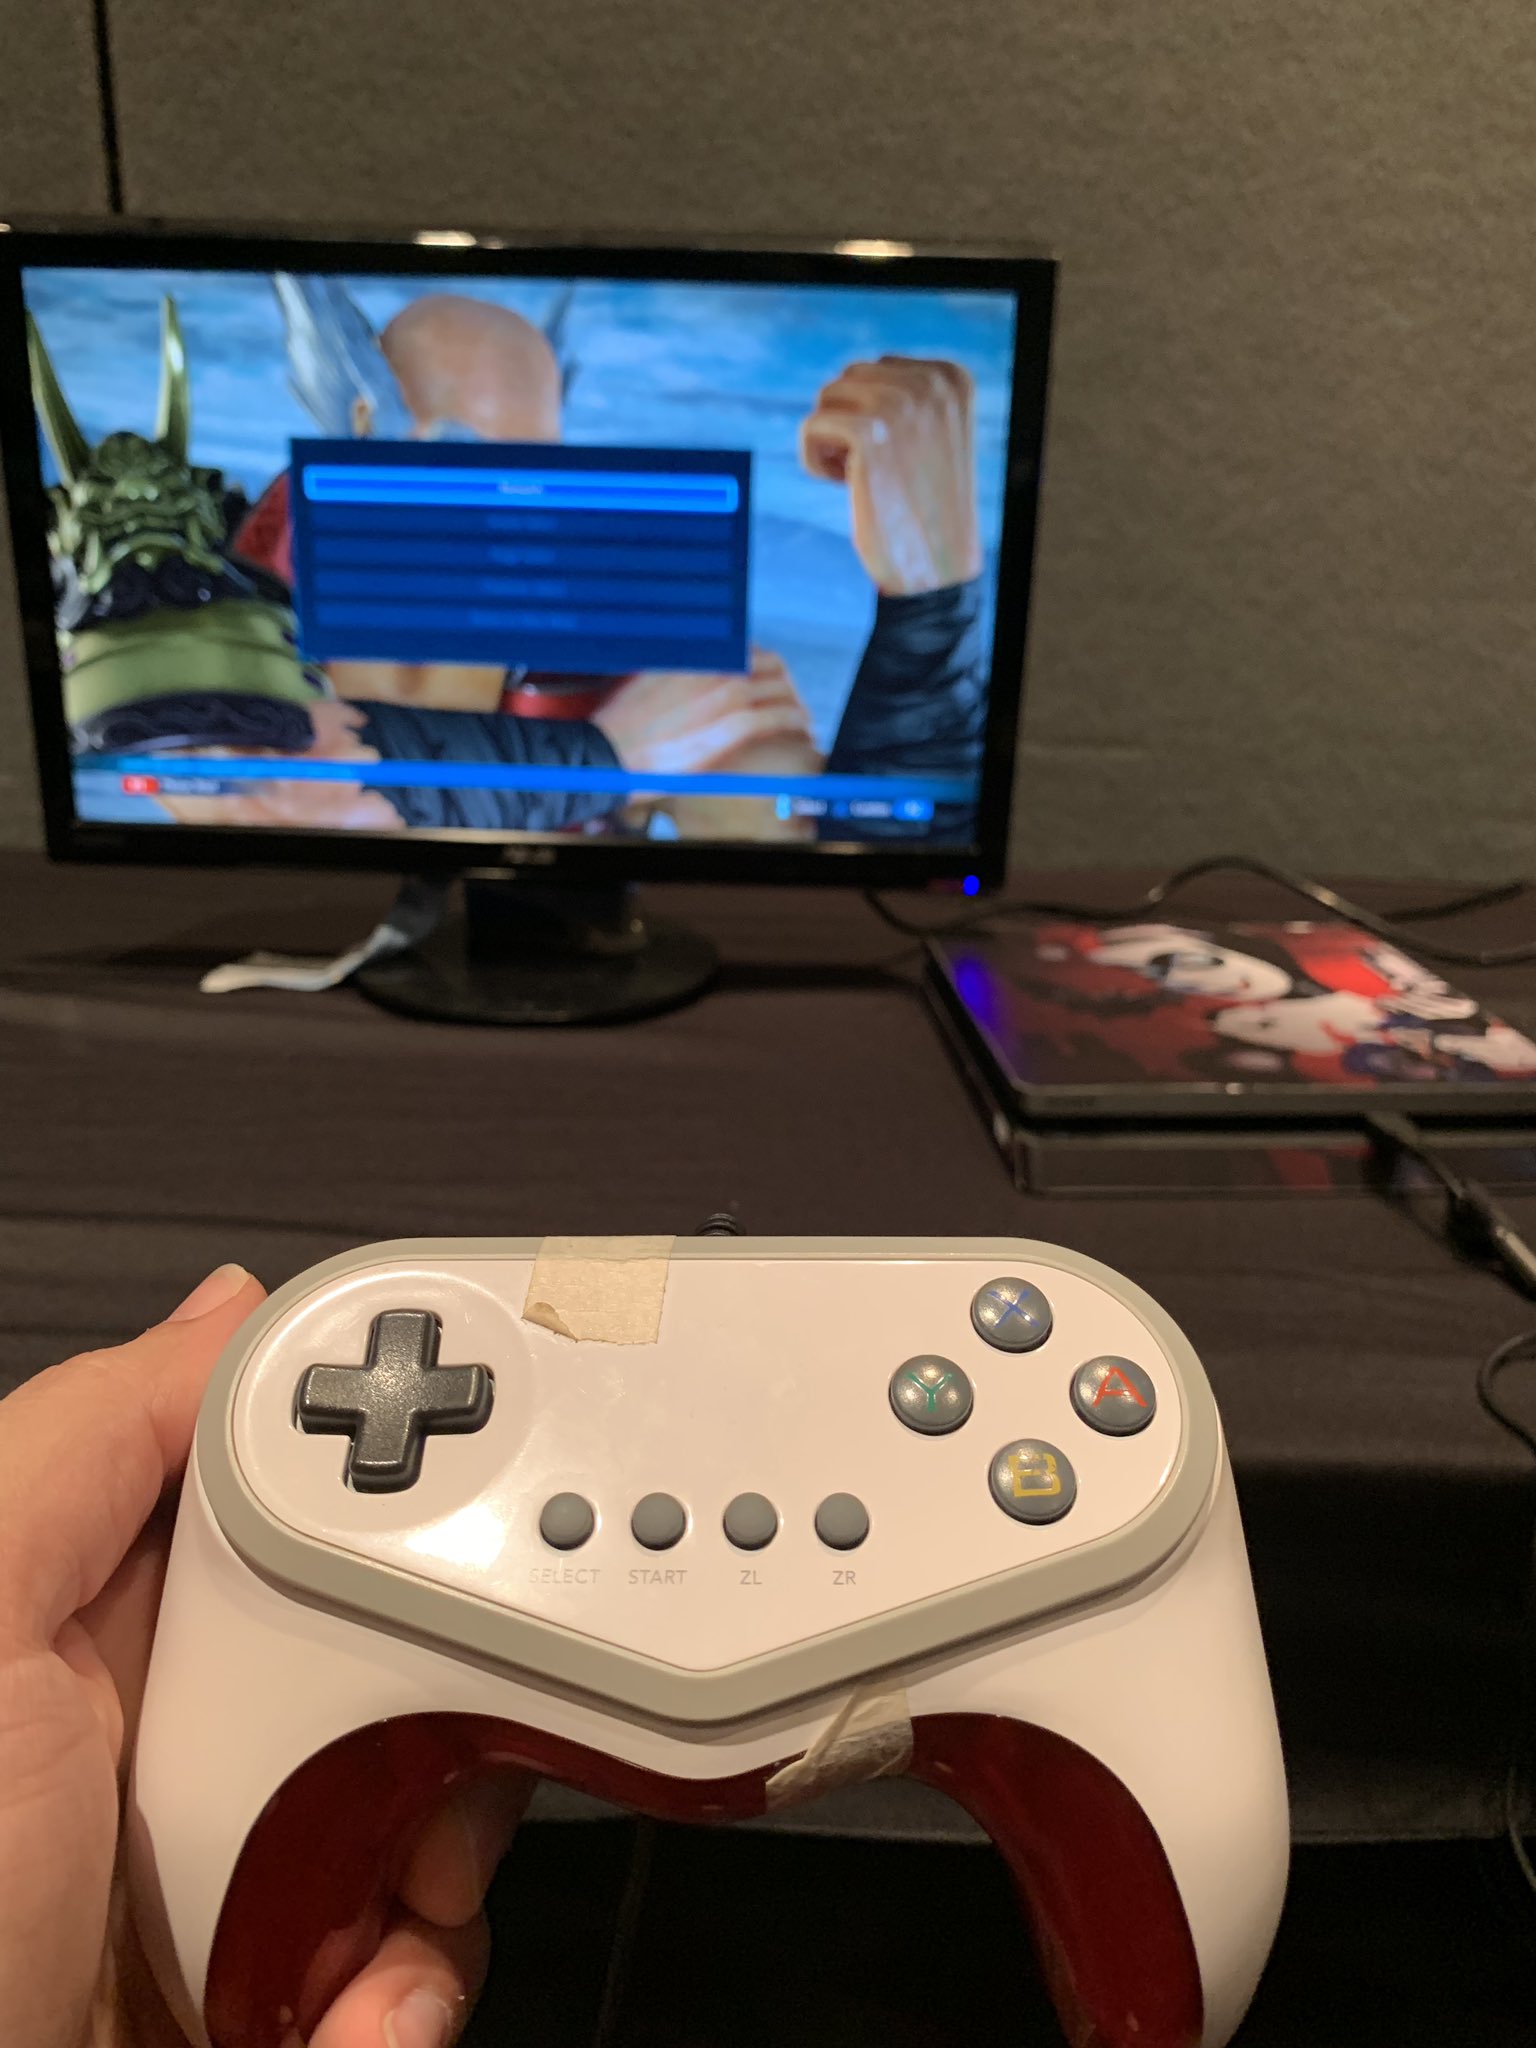 Alex Jebailey on Twitter: "TIL you can use a Pokken Pad on PS4. Works great for Tekken just doesn't have a Home button so you'll need to get into game first